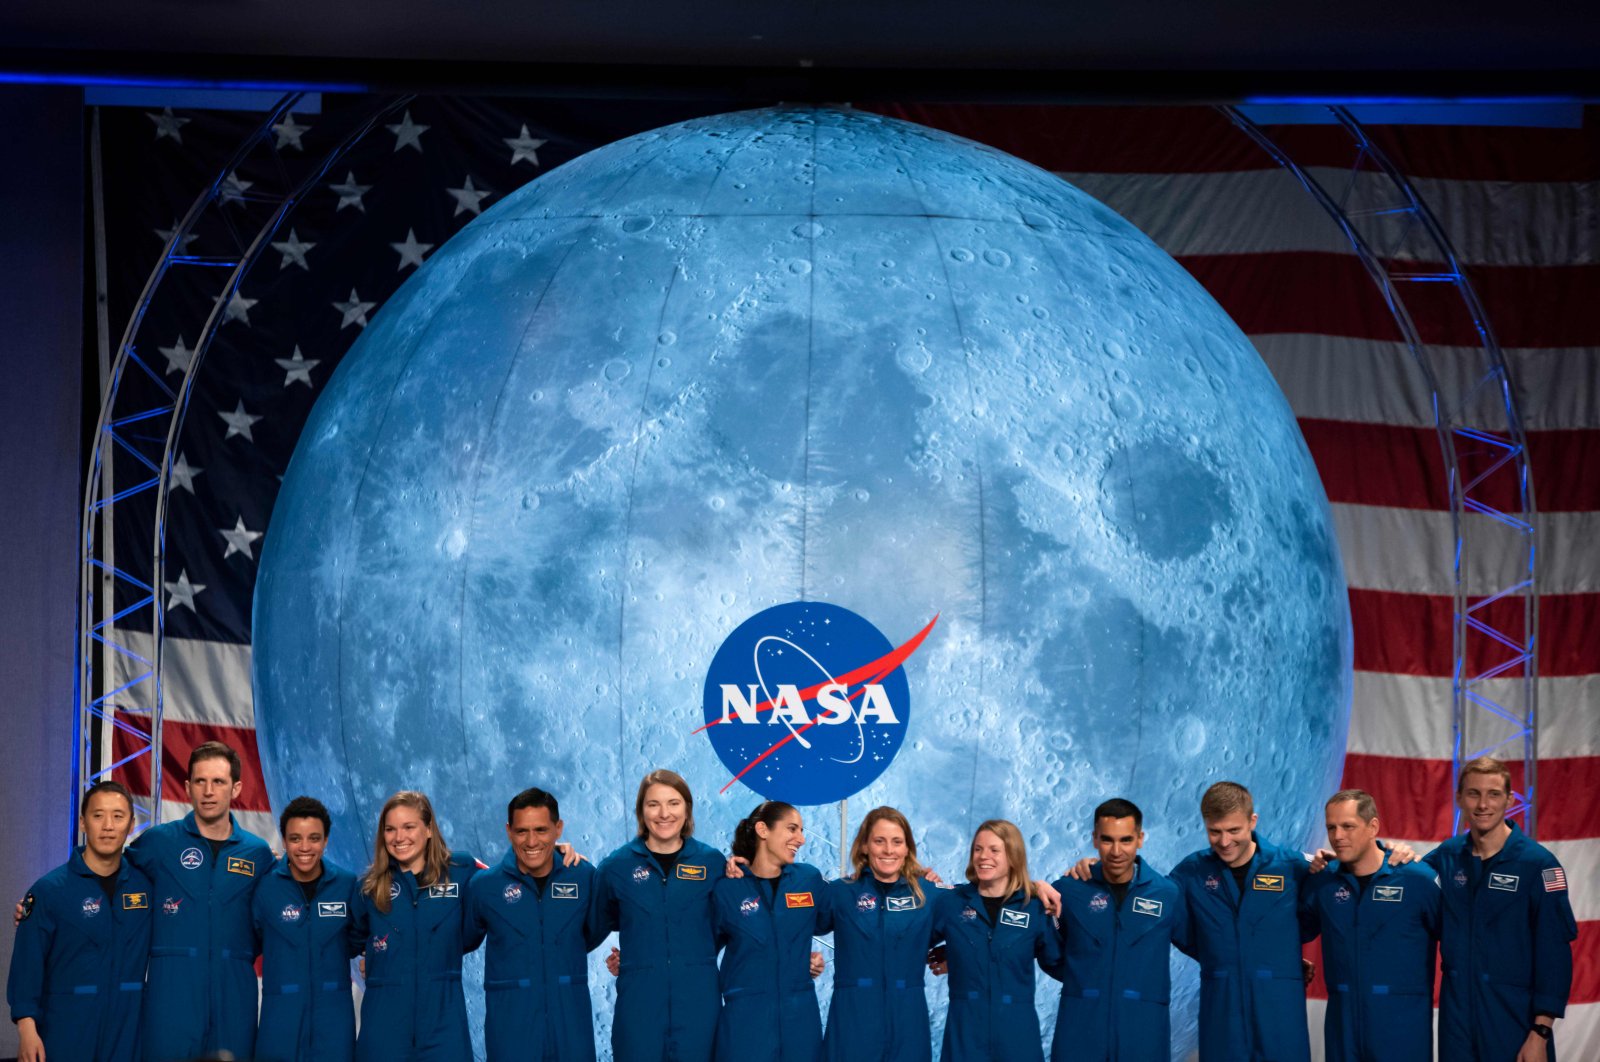 In this file photo taken on Jan. 10, 2020, NASA and Canadian Space Agency (CSA) astronauts acknowledge the audience after their graduation ceremony at Johnson Space Center in Houston Texas. (AFP Photo)